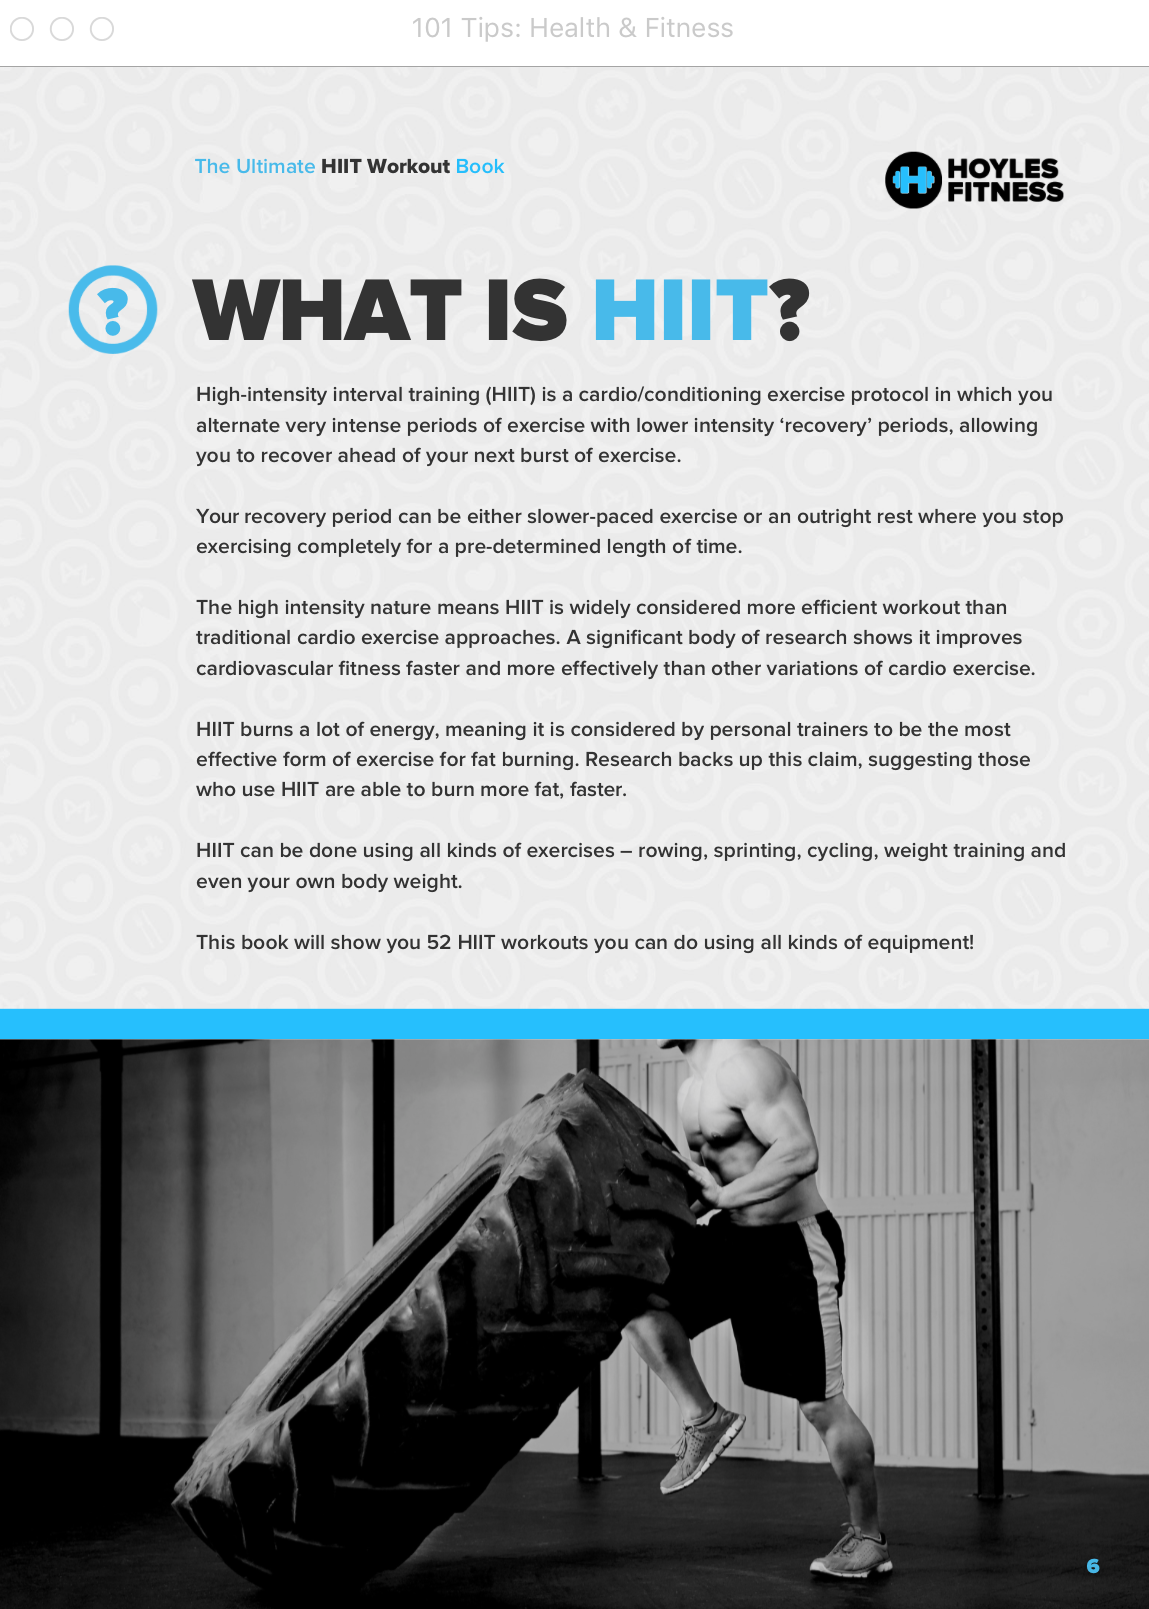 hiit workout routine